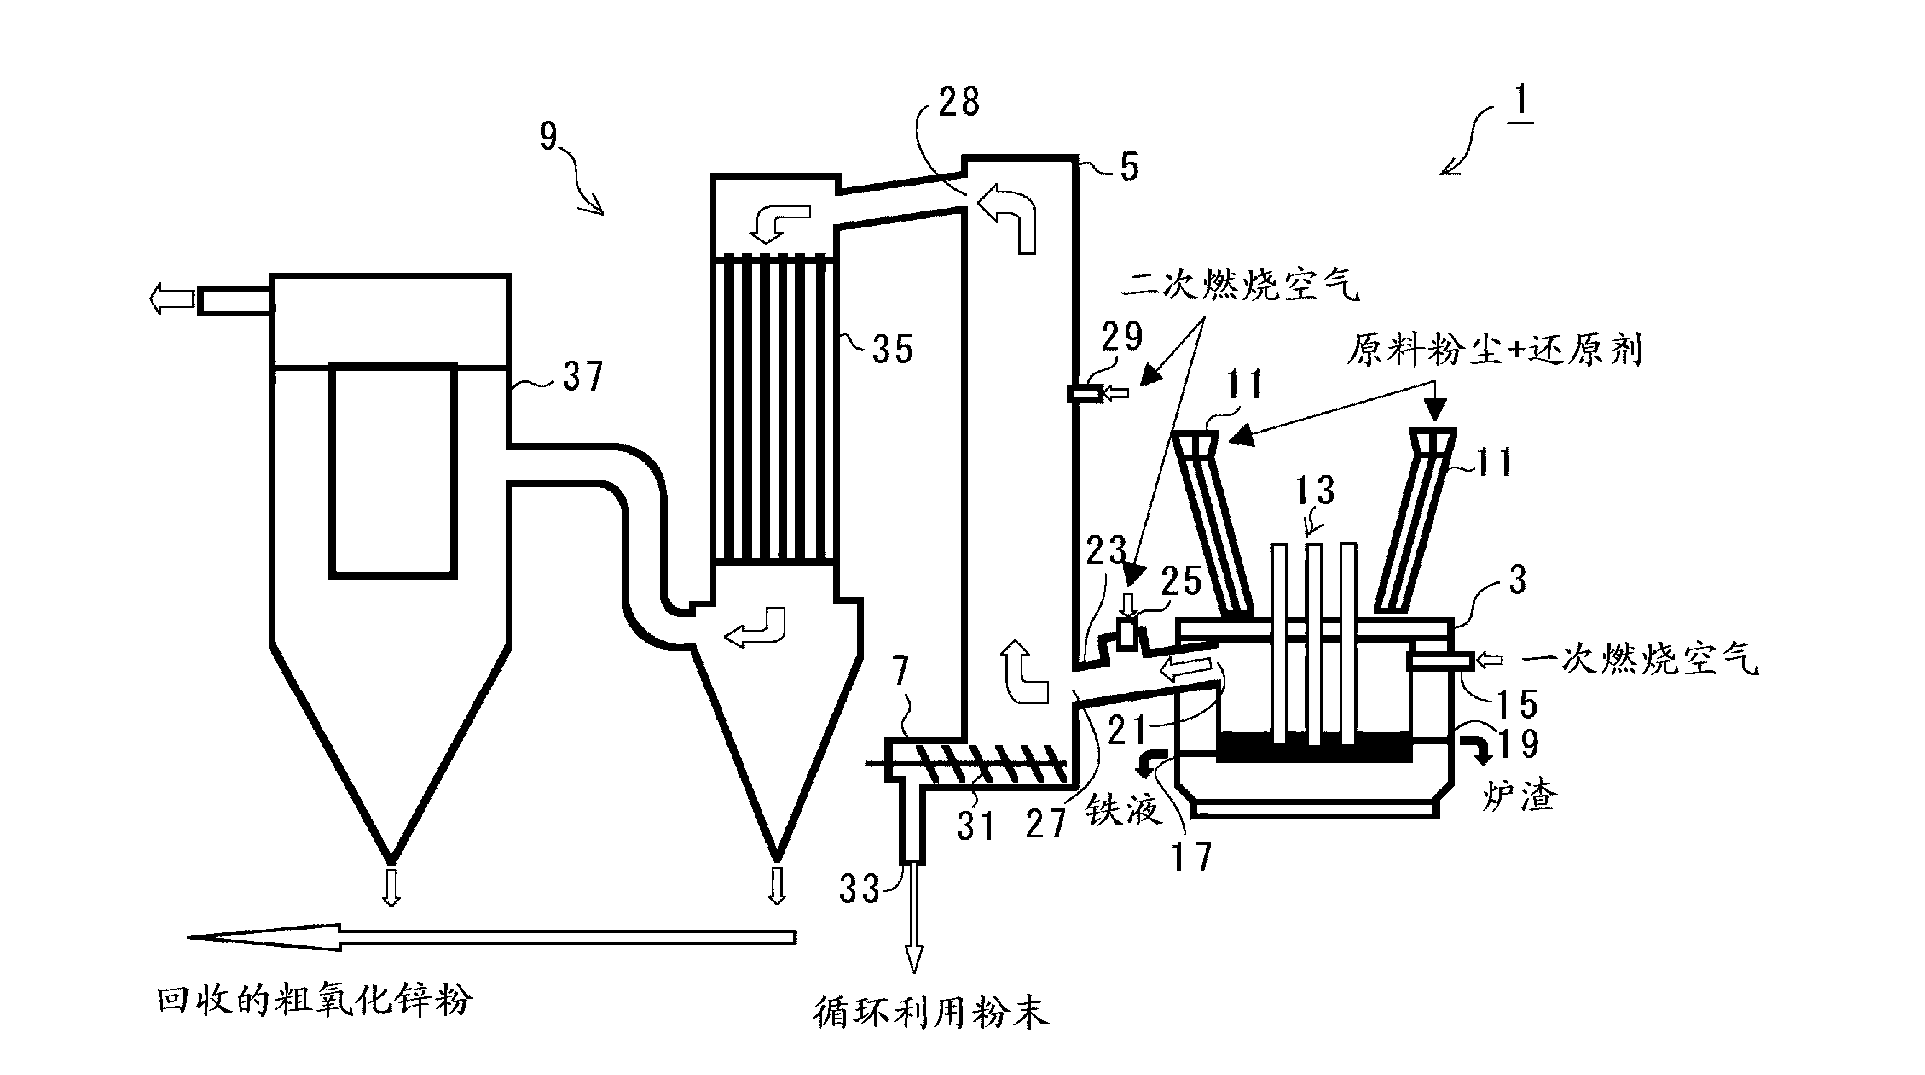 Method and apparatus for recovering metal from electric furnace dust